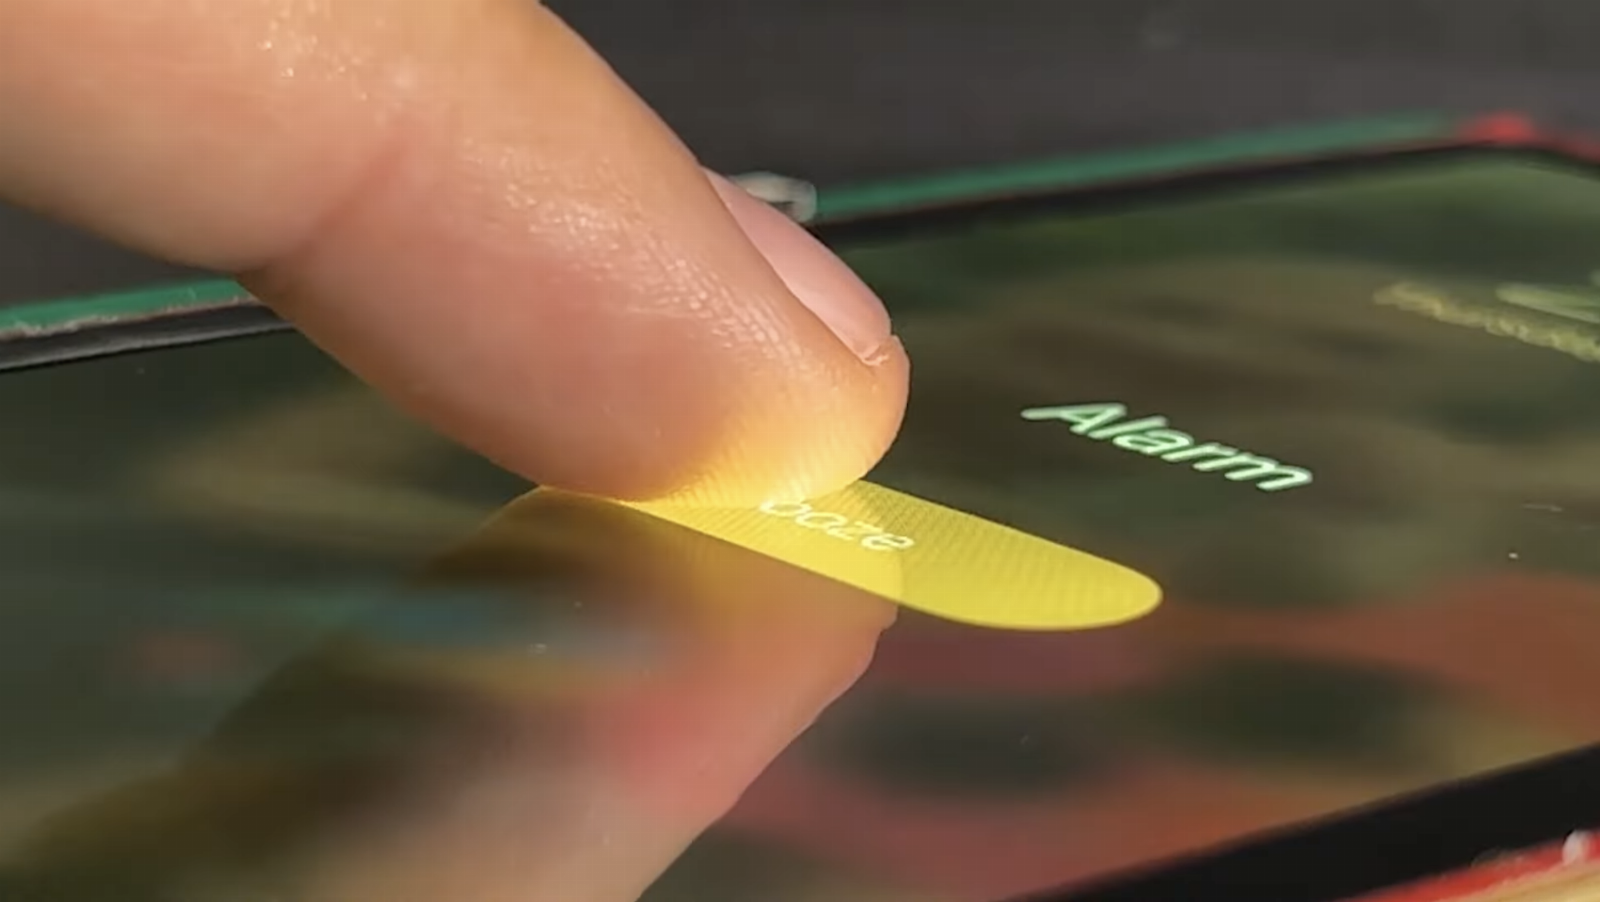 Researchers develop tiny hydraulic haptics for touchscreen notifications you can physically feel